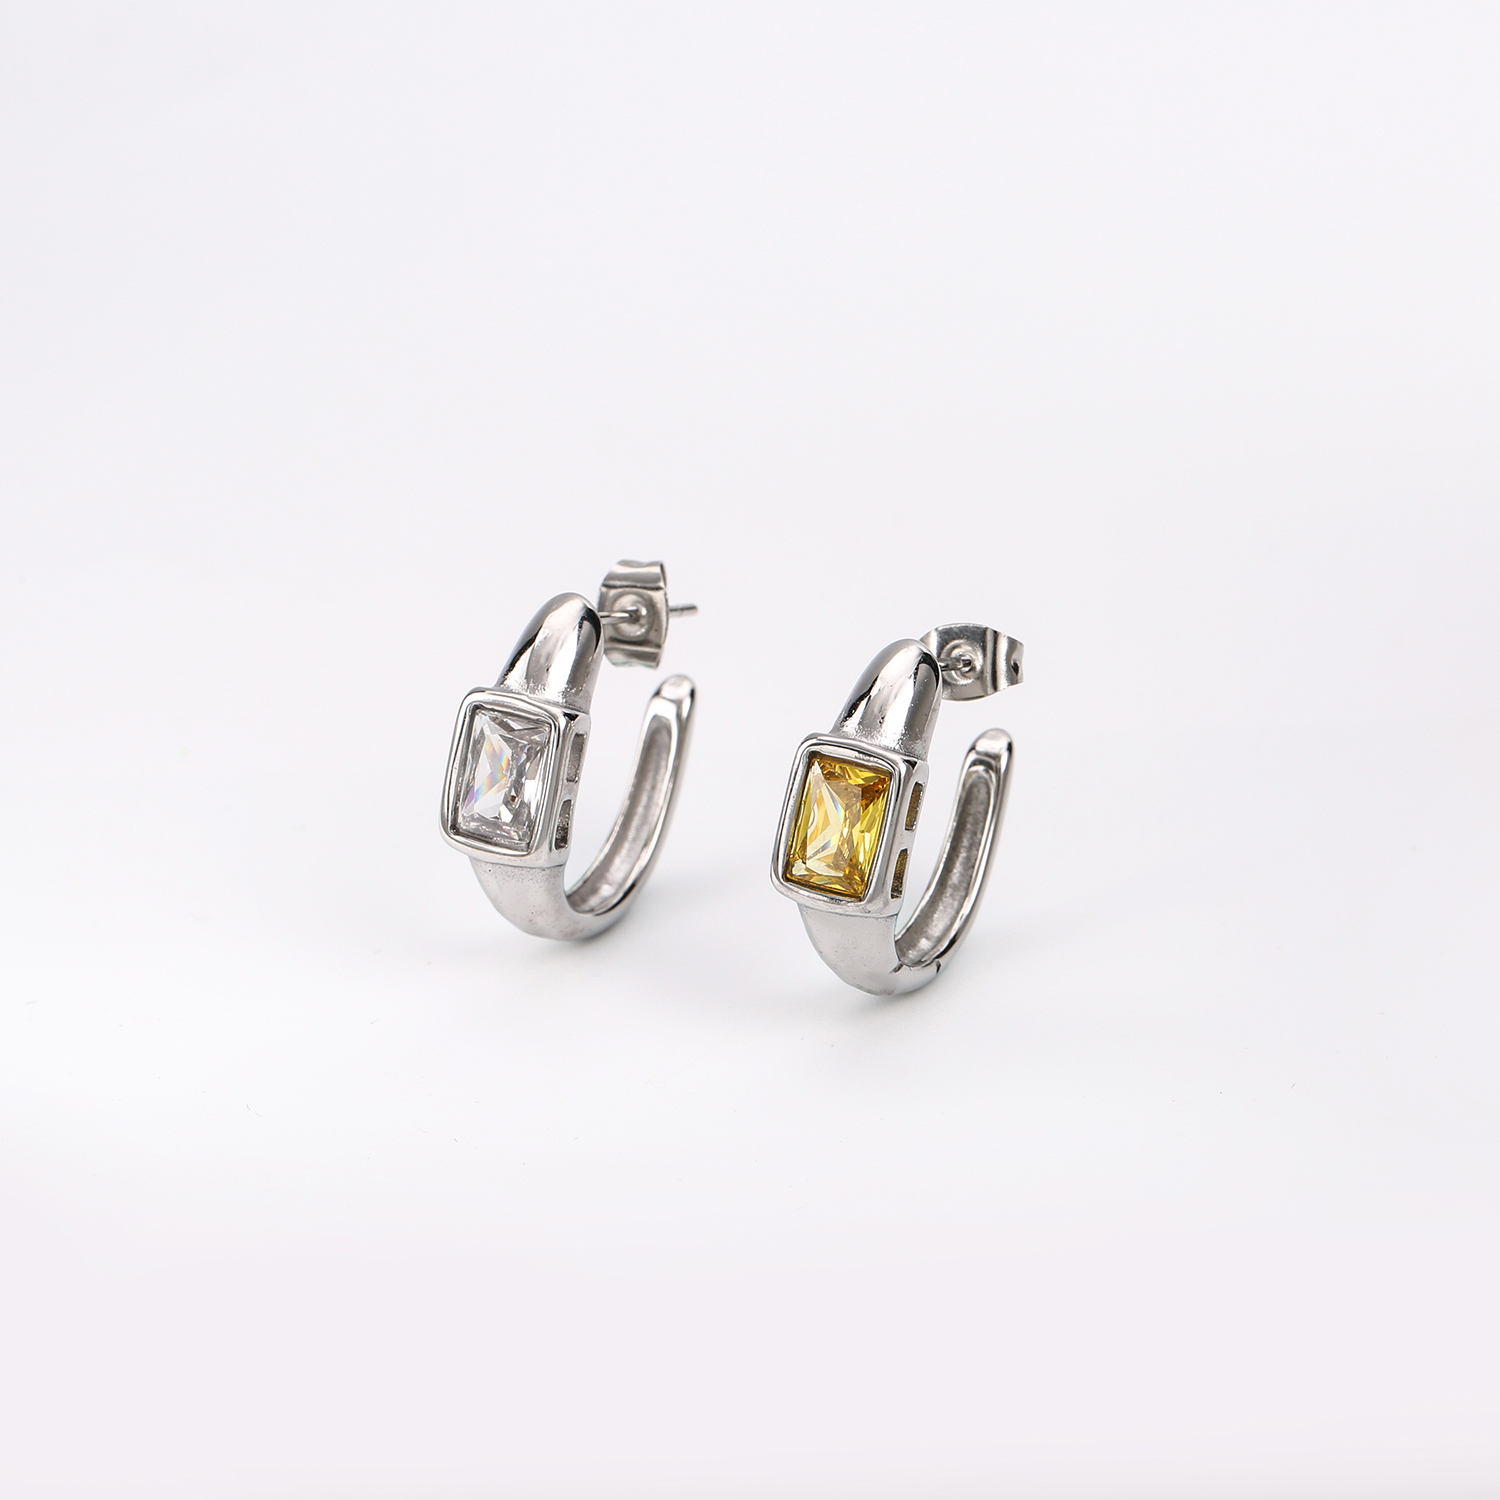 316L stainless steel earrings with diamond